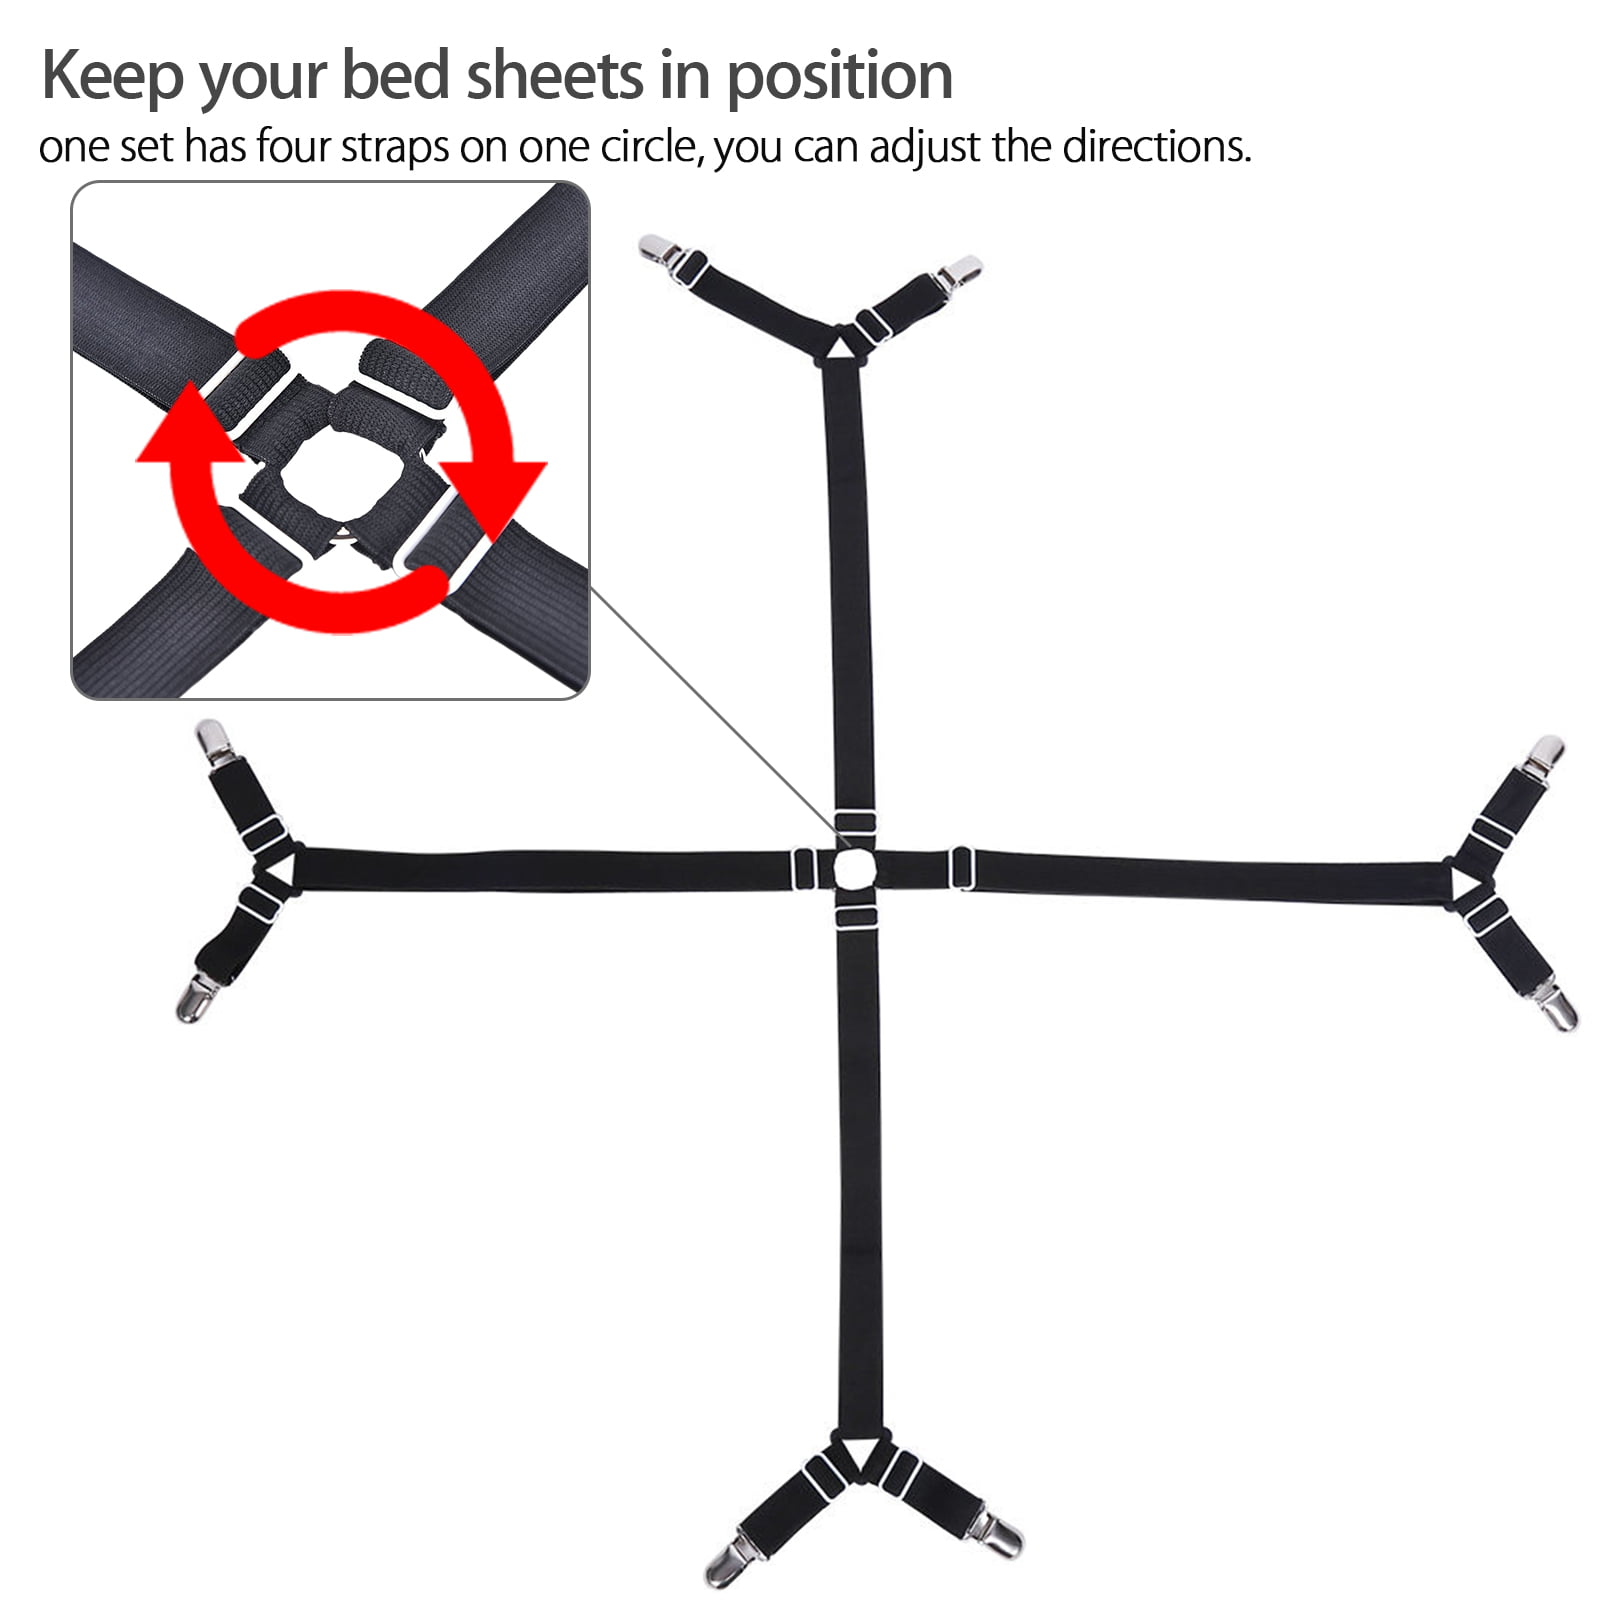 The Nyche Designs Crisscross 2 Way Adjustable Bed Sheet Straps Suspenders Grippers Fasteners for All Bedsheets Fitted Sheets Flat Sheets Set of 2, Black